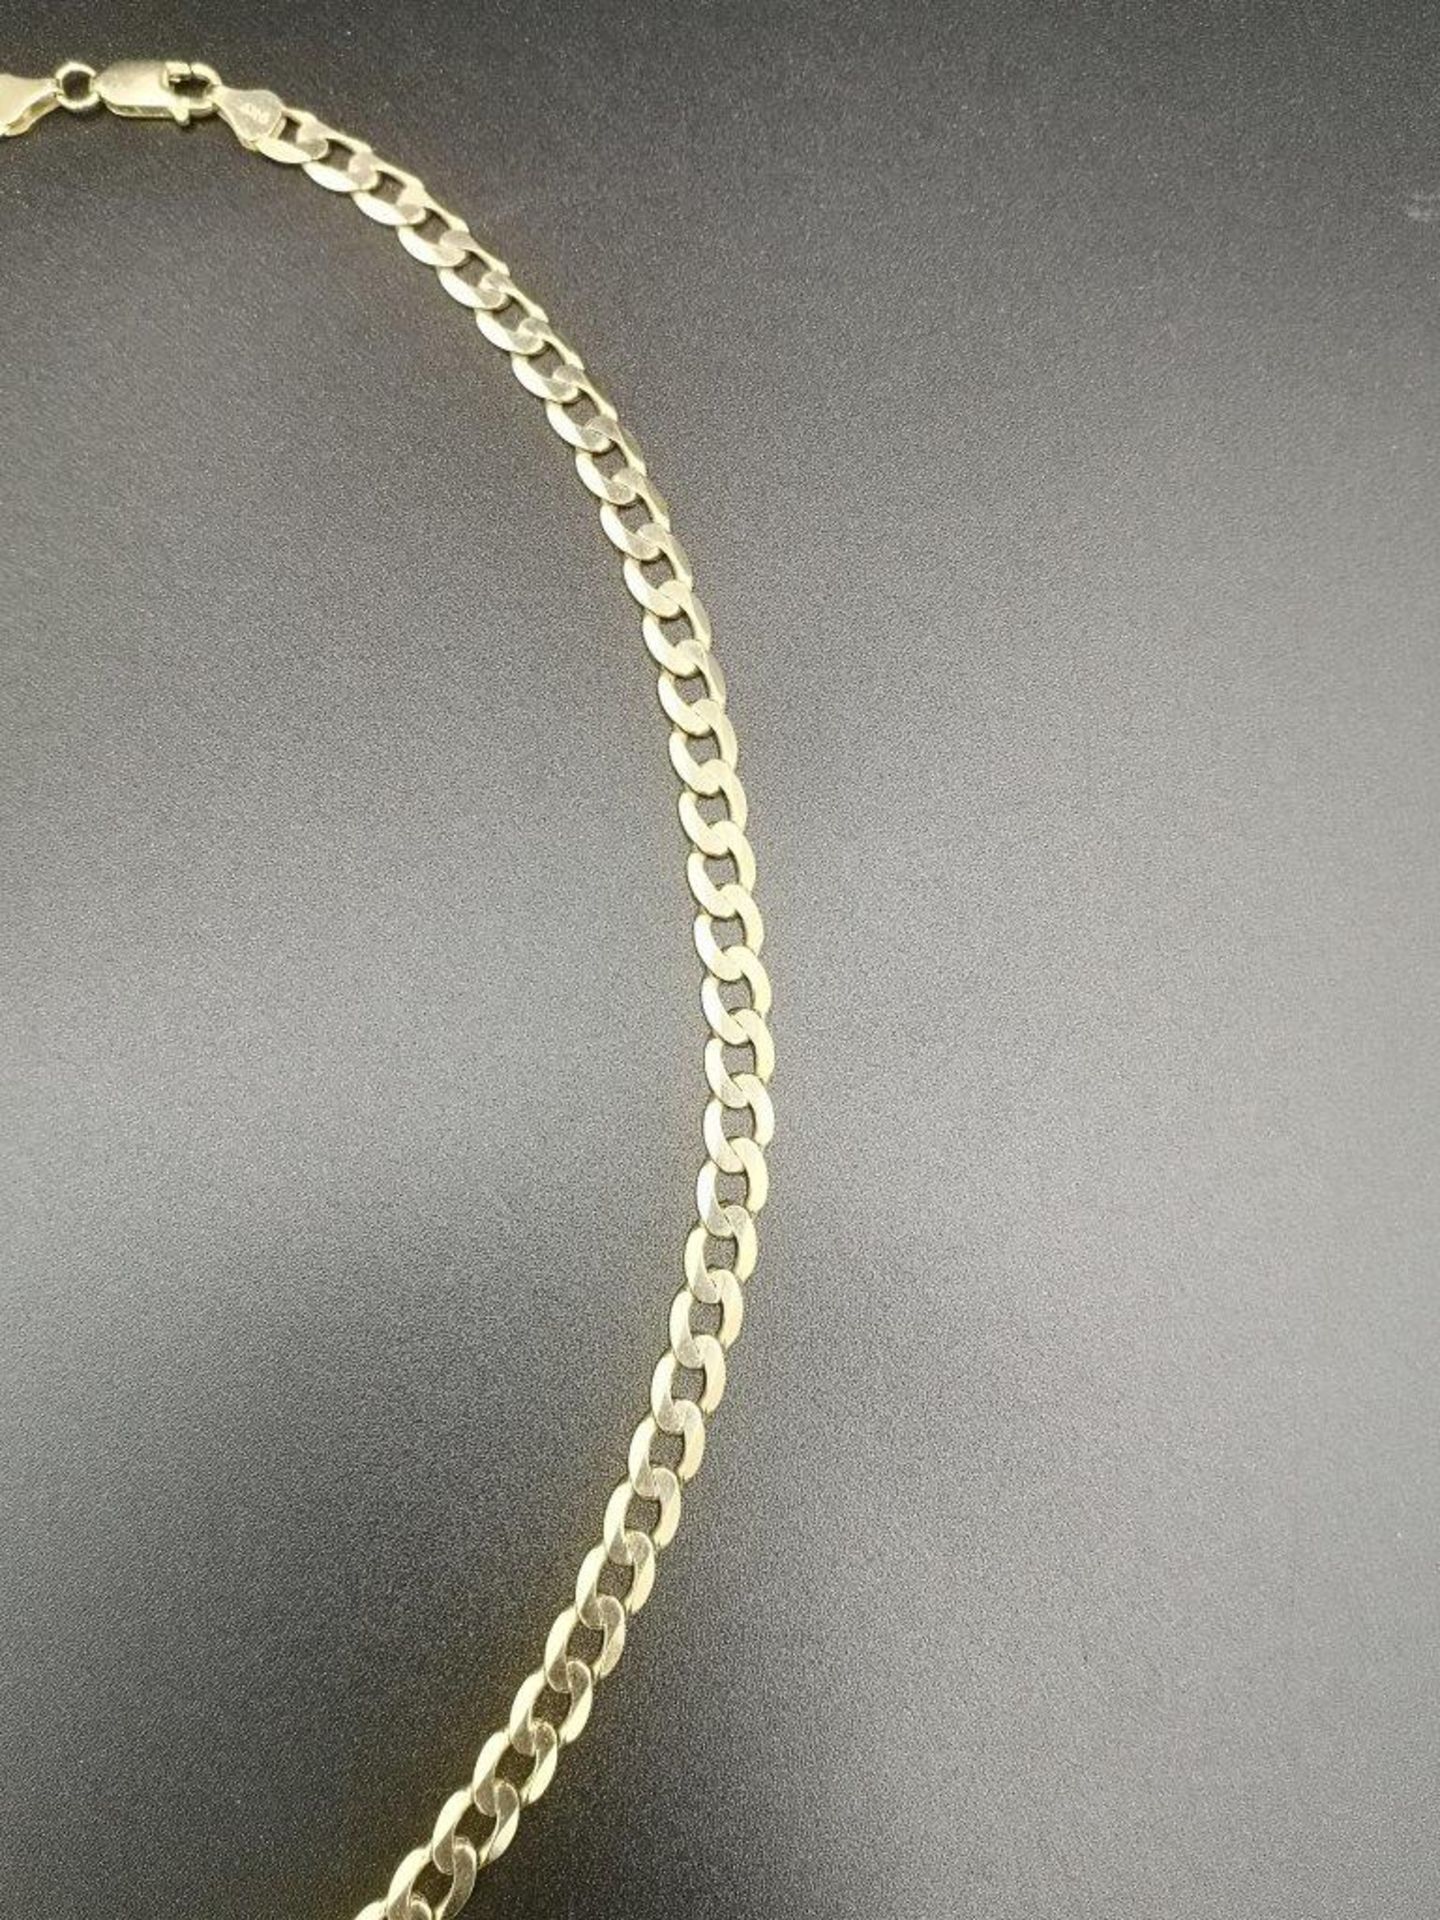 9ct gold curb link chain - Image 5 of 7